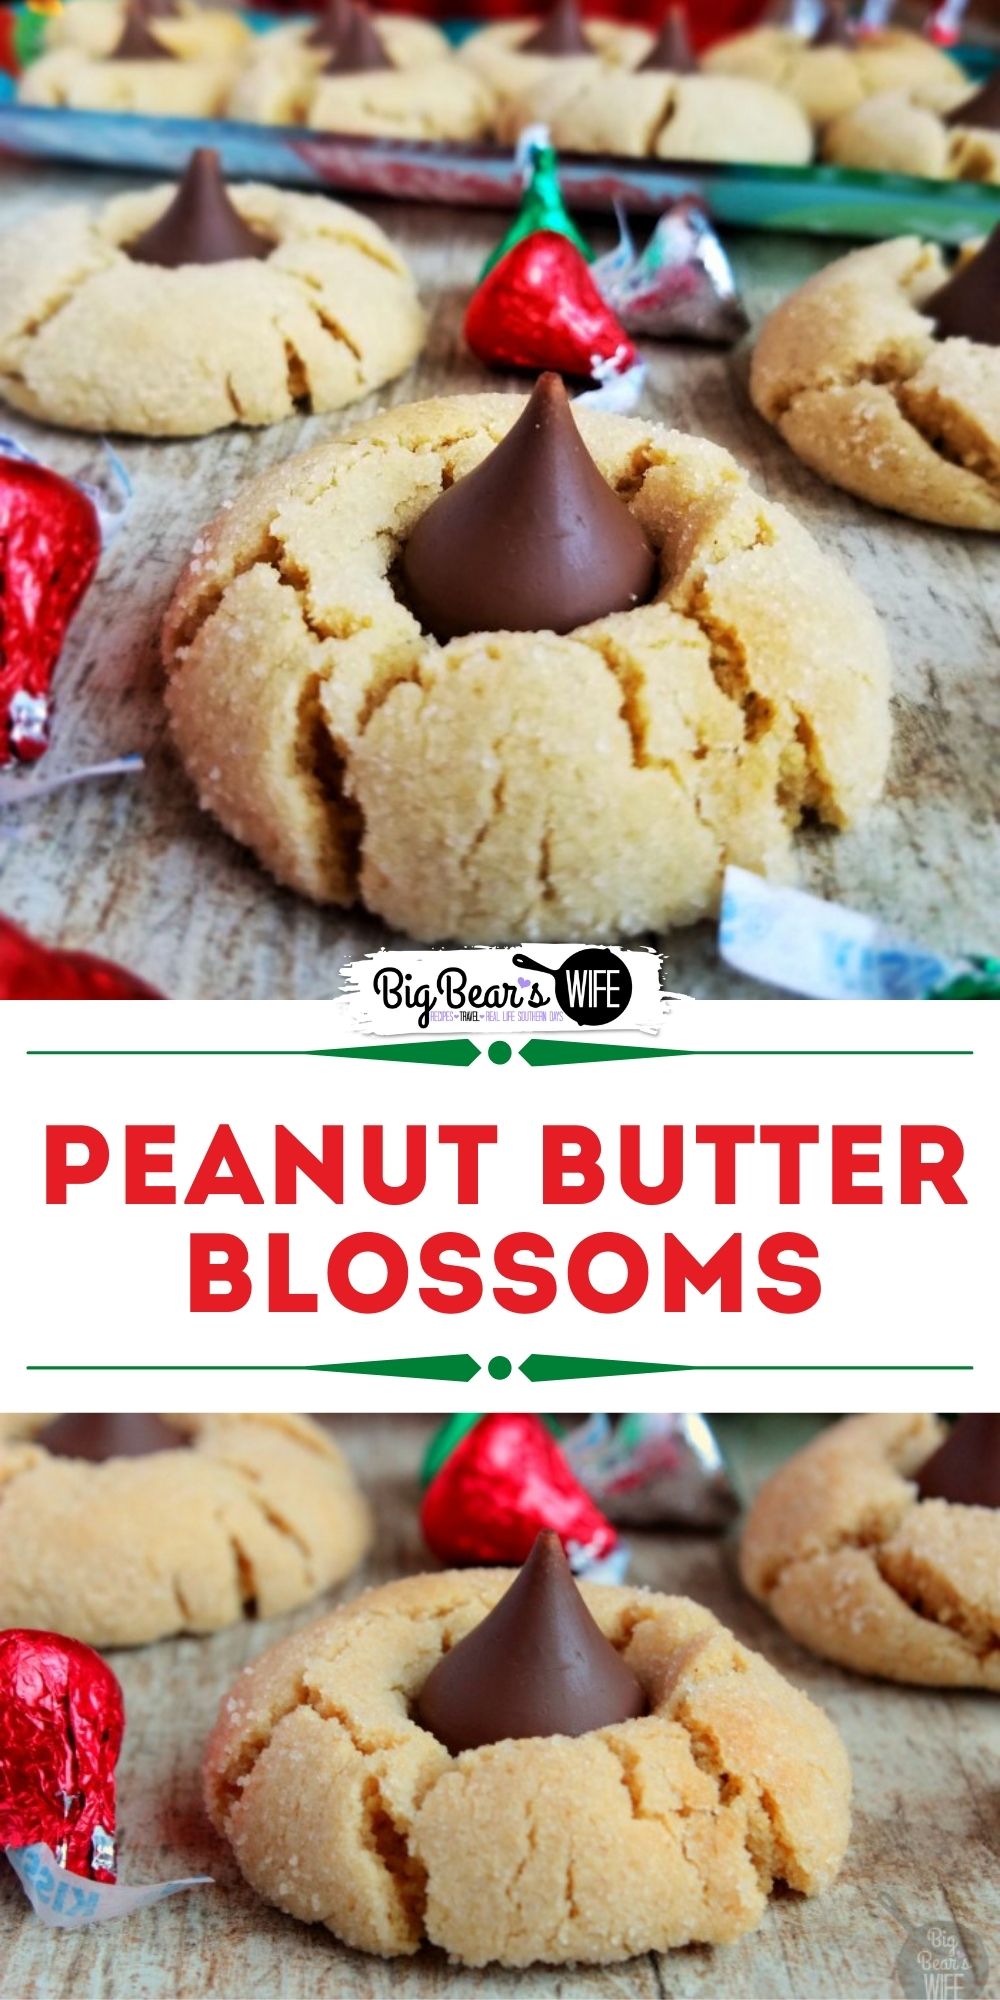 Sweet Peanut Butter cookies rolled in sugar and then baked to perfection! As soon as they come out of the oven, press a chocolate kiss down into the center to make the best Peanut Butter Blossoms! via @bigbearswife